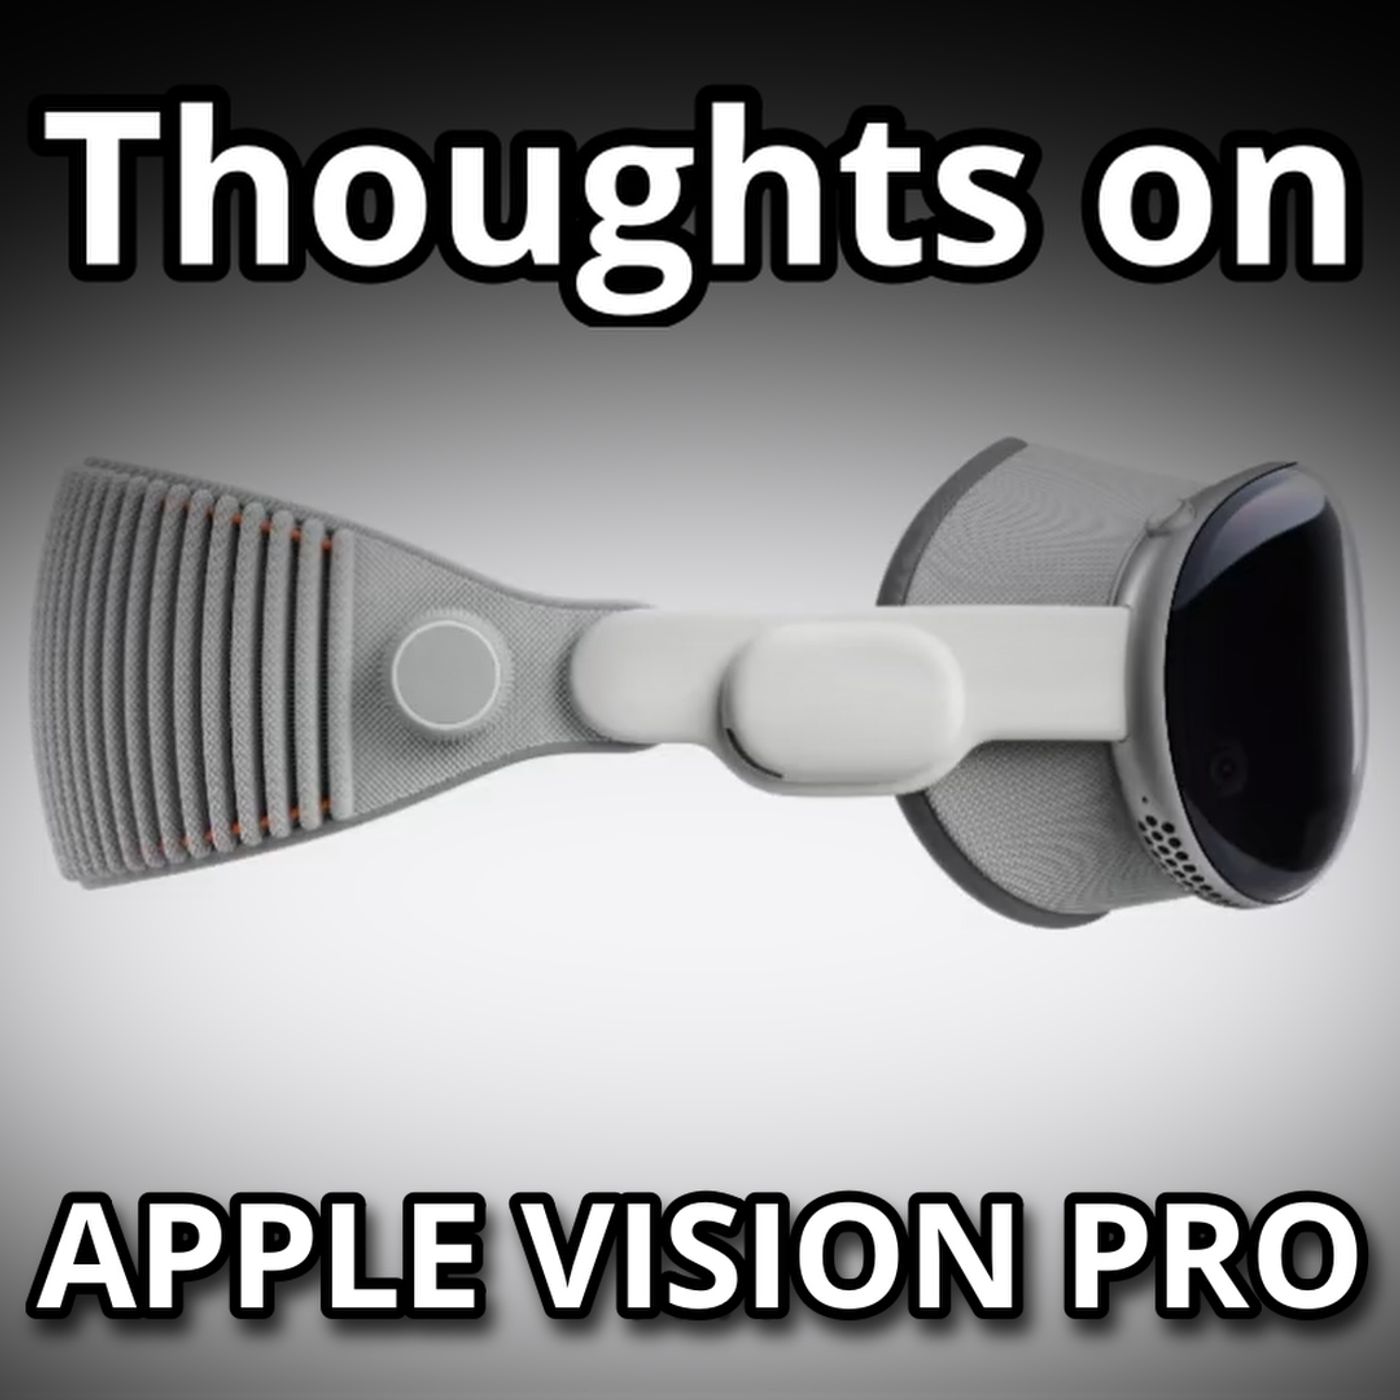 Thoughts on Apple Vision Pro from a VR OG | 271